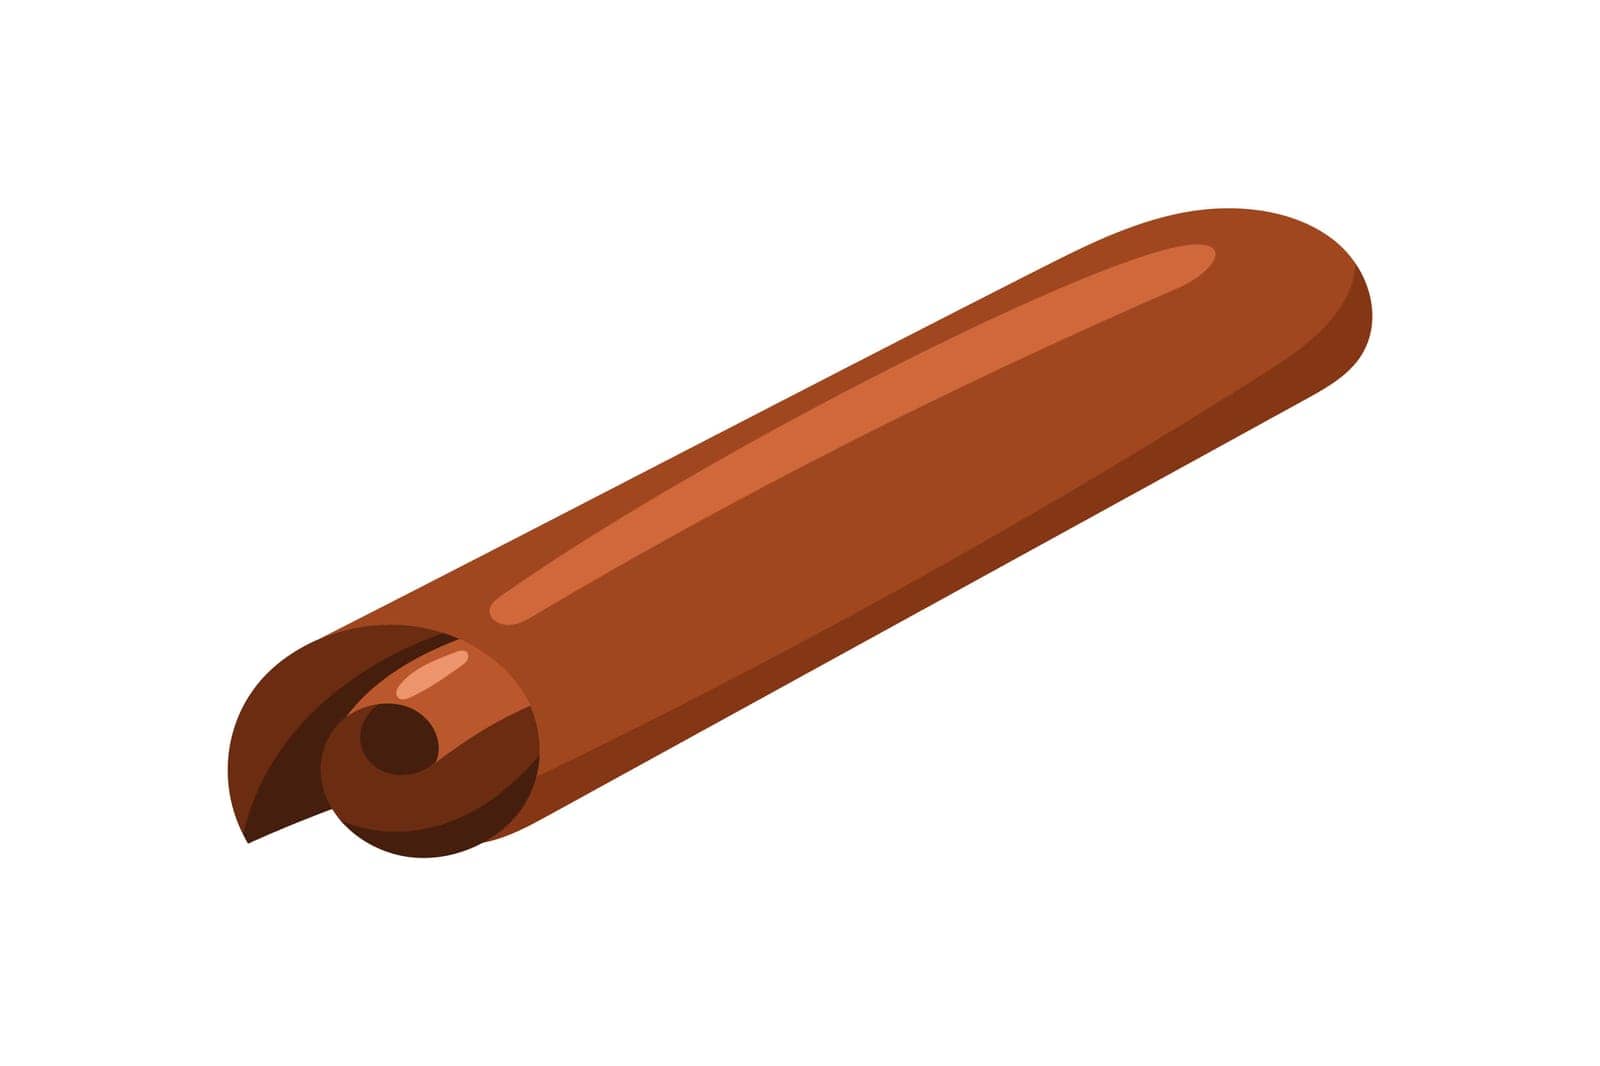 cinnamon stick on a white background. Isolated vector illustration